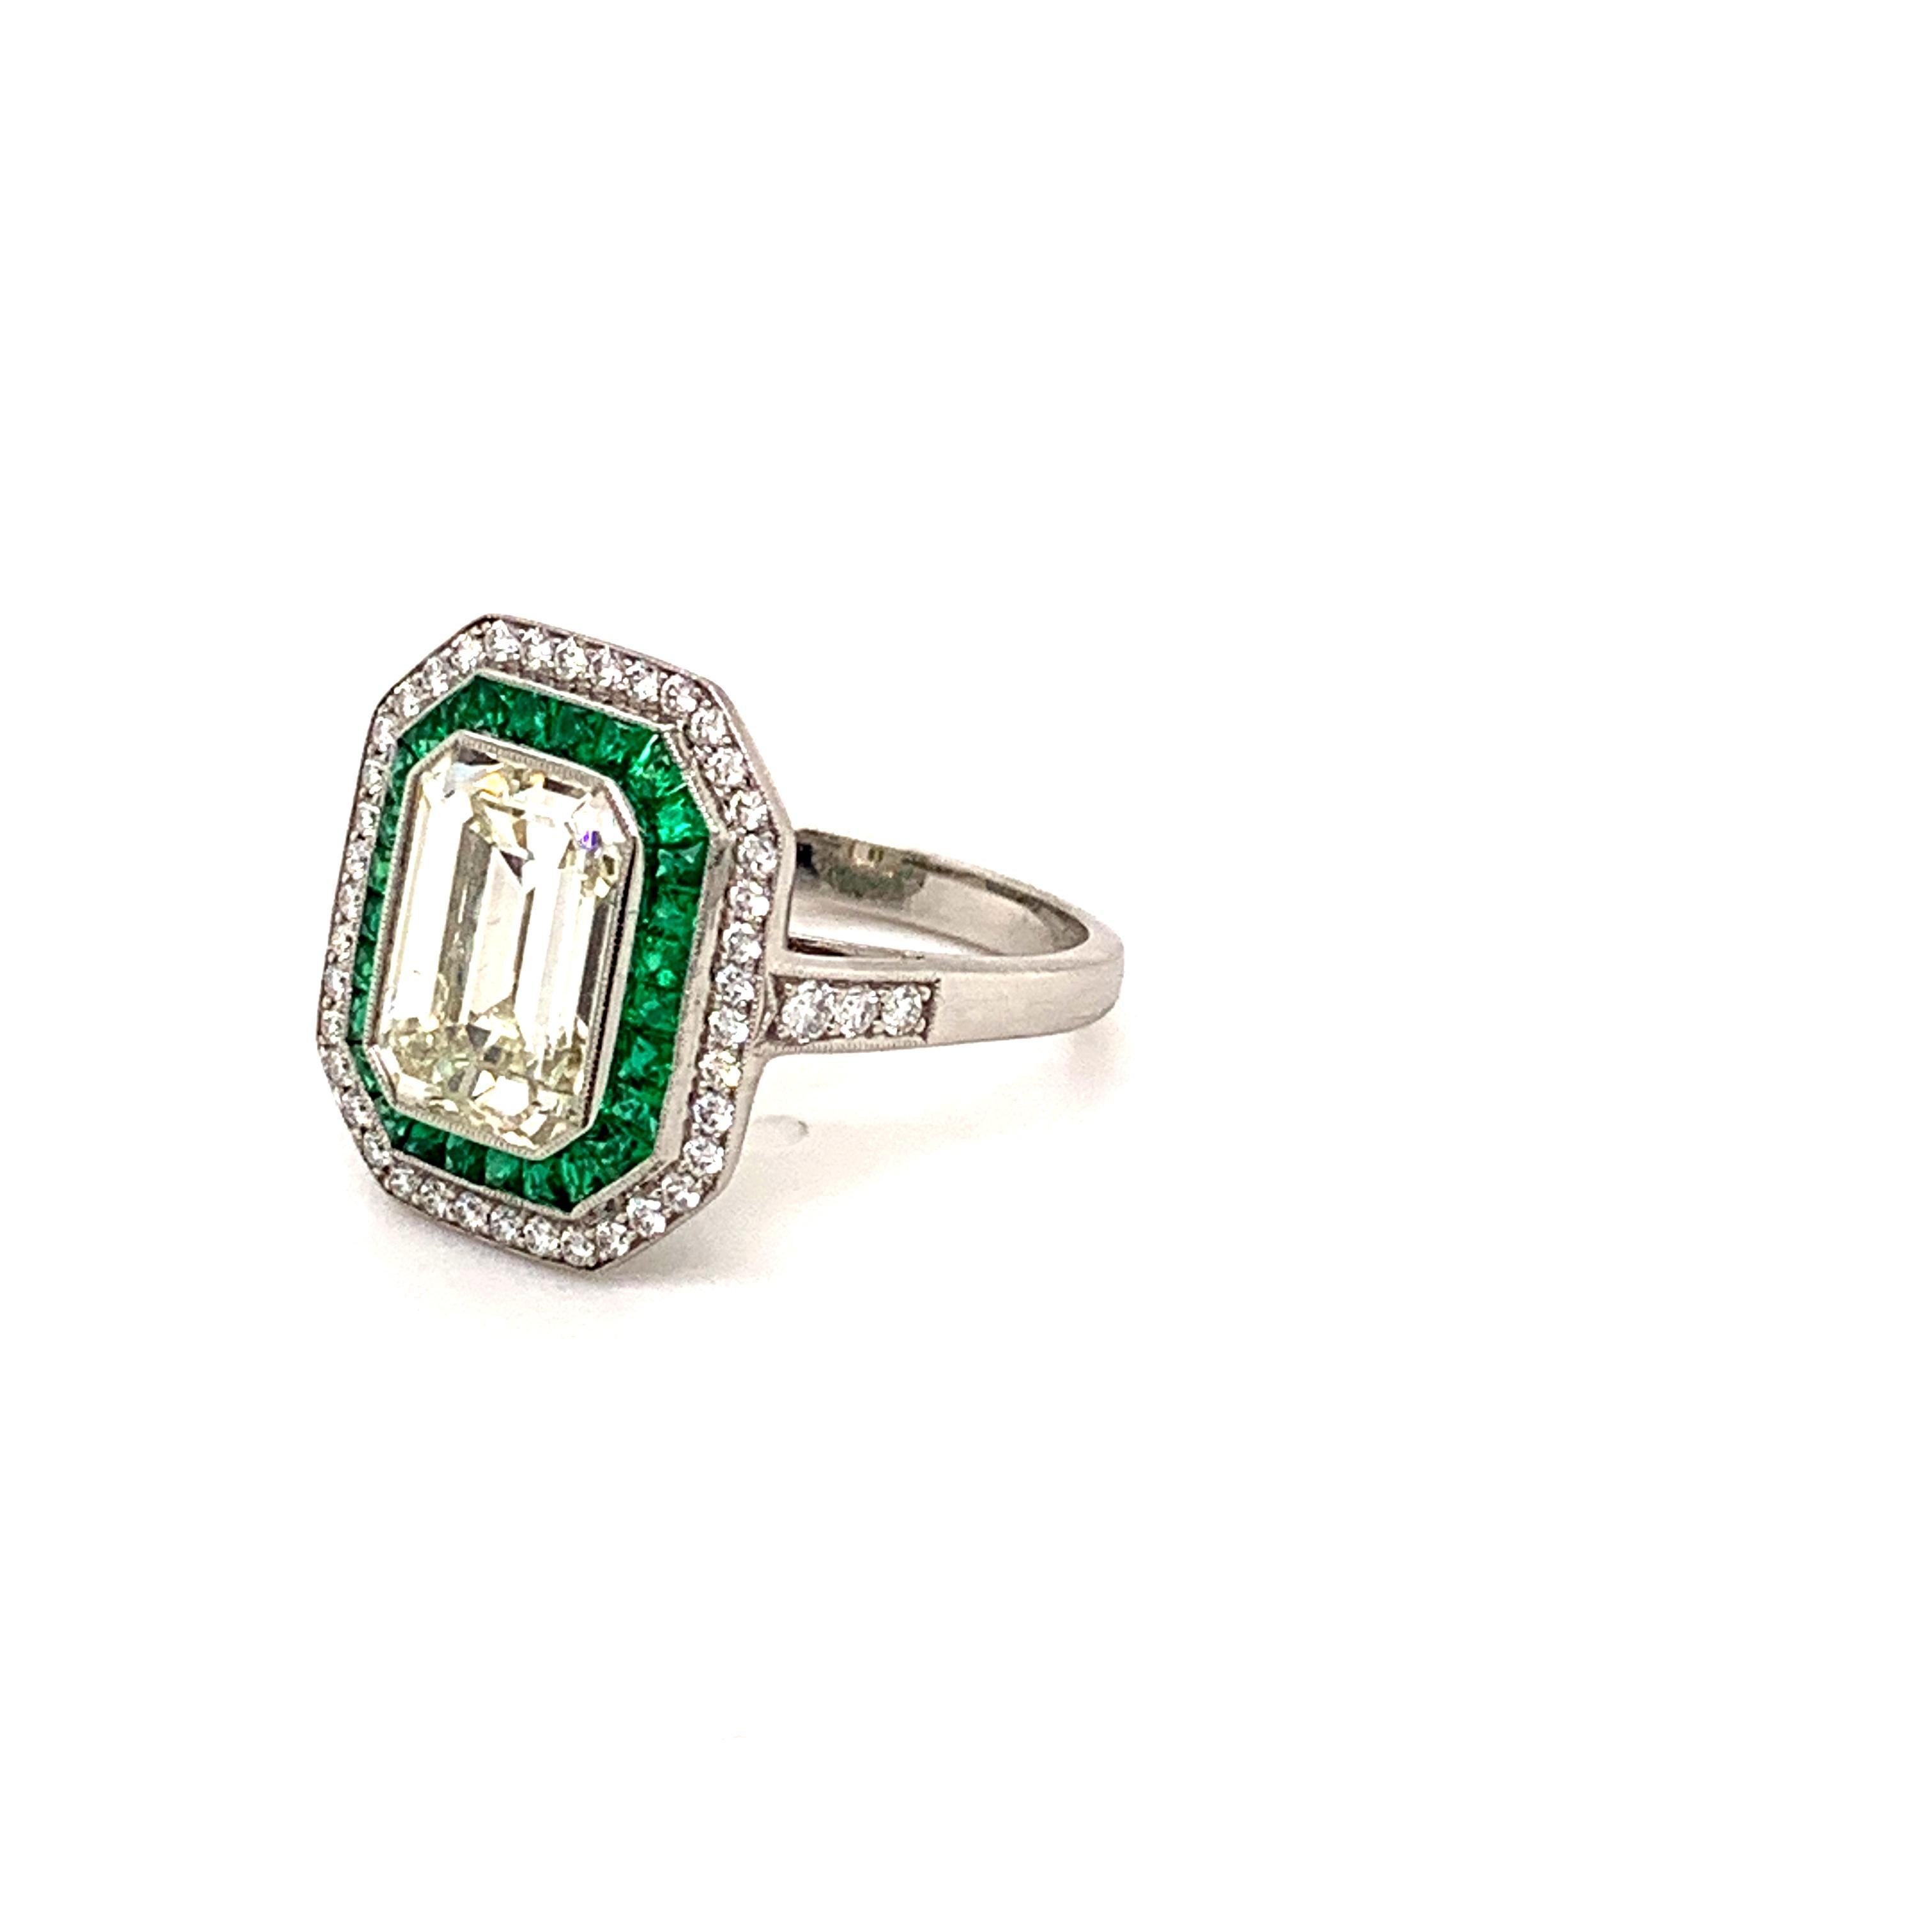 Sophia D. 2.84 Carat Emerald Cut Diamond and Emerald Platinum Ring In New Condition For Sale In New York, NY